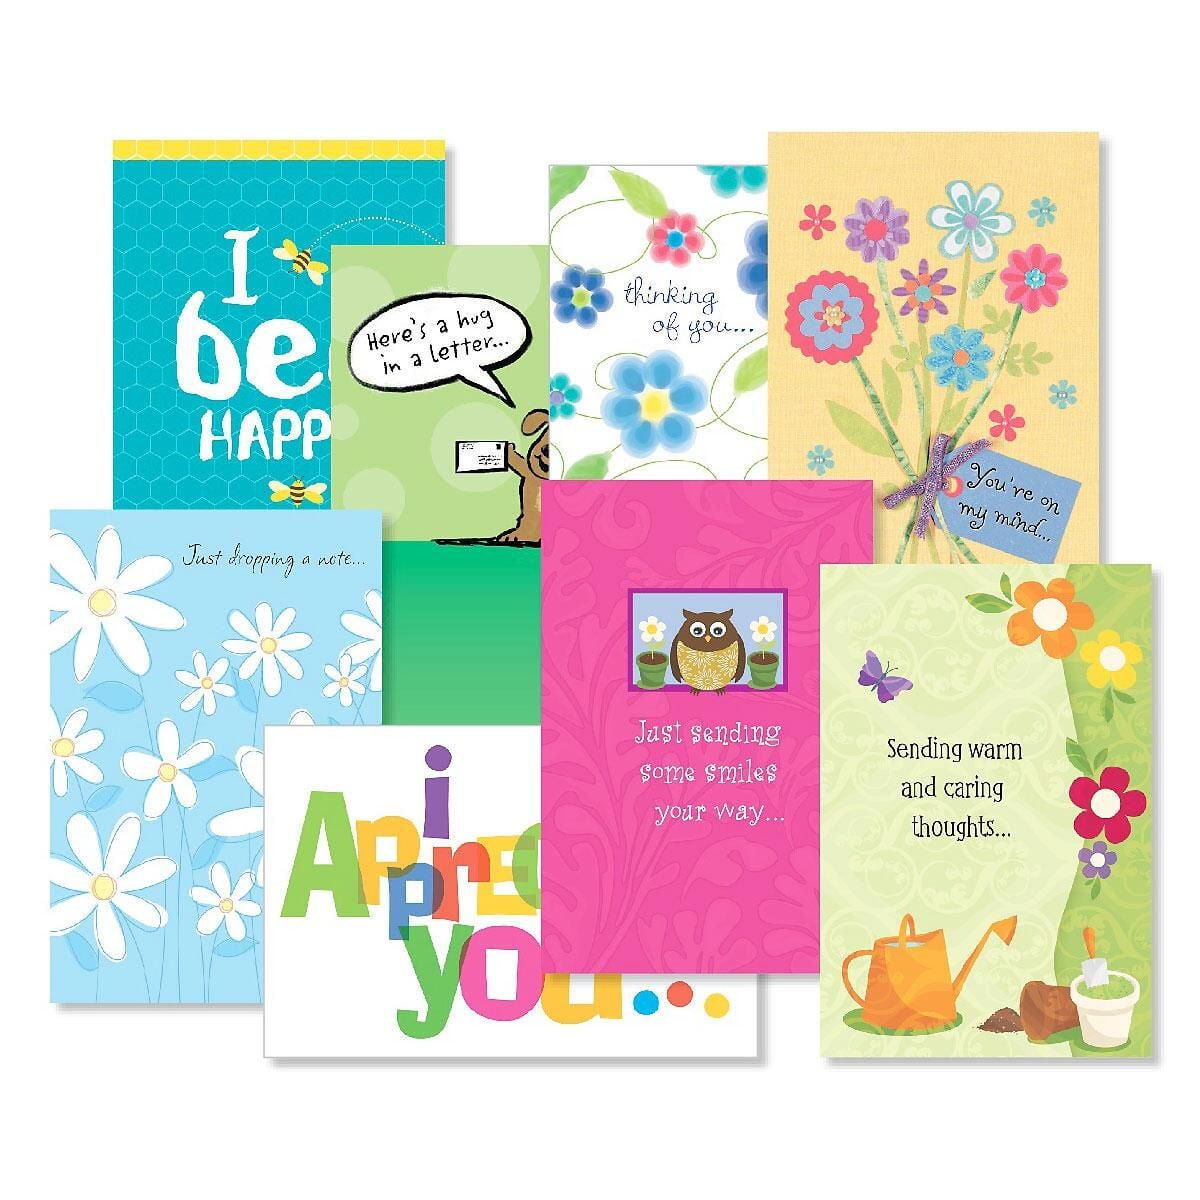 Thinking of You Greeting Cards Value Pack I - Set of 16 (8 Designs) Large  5 x 7 Cards, Sentiments Inside, Friendship Cards, by Current